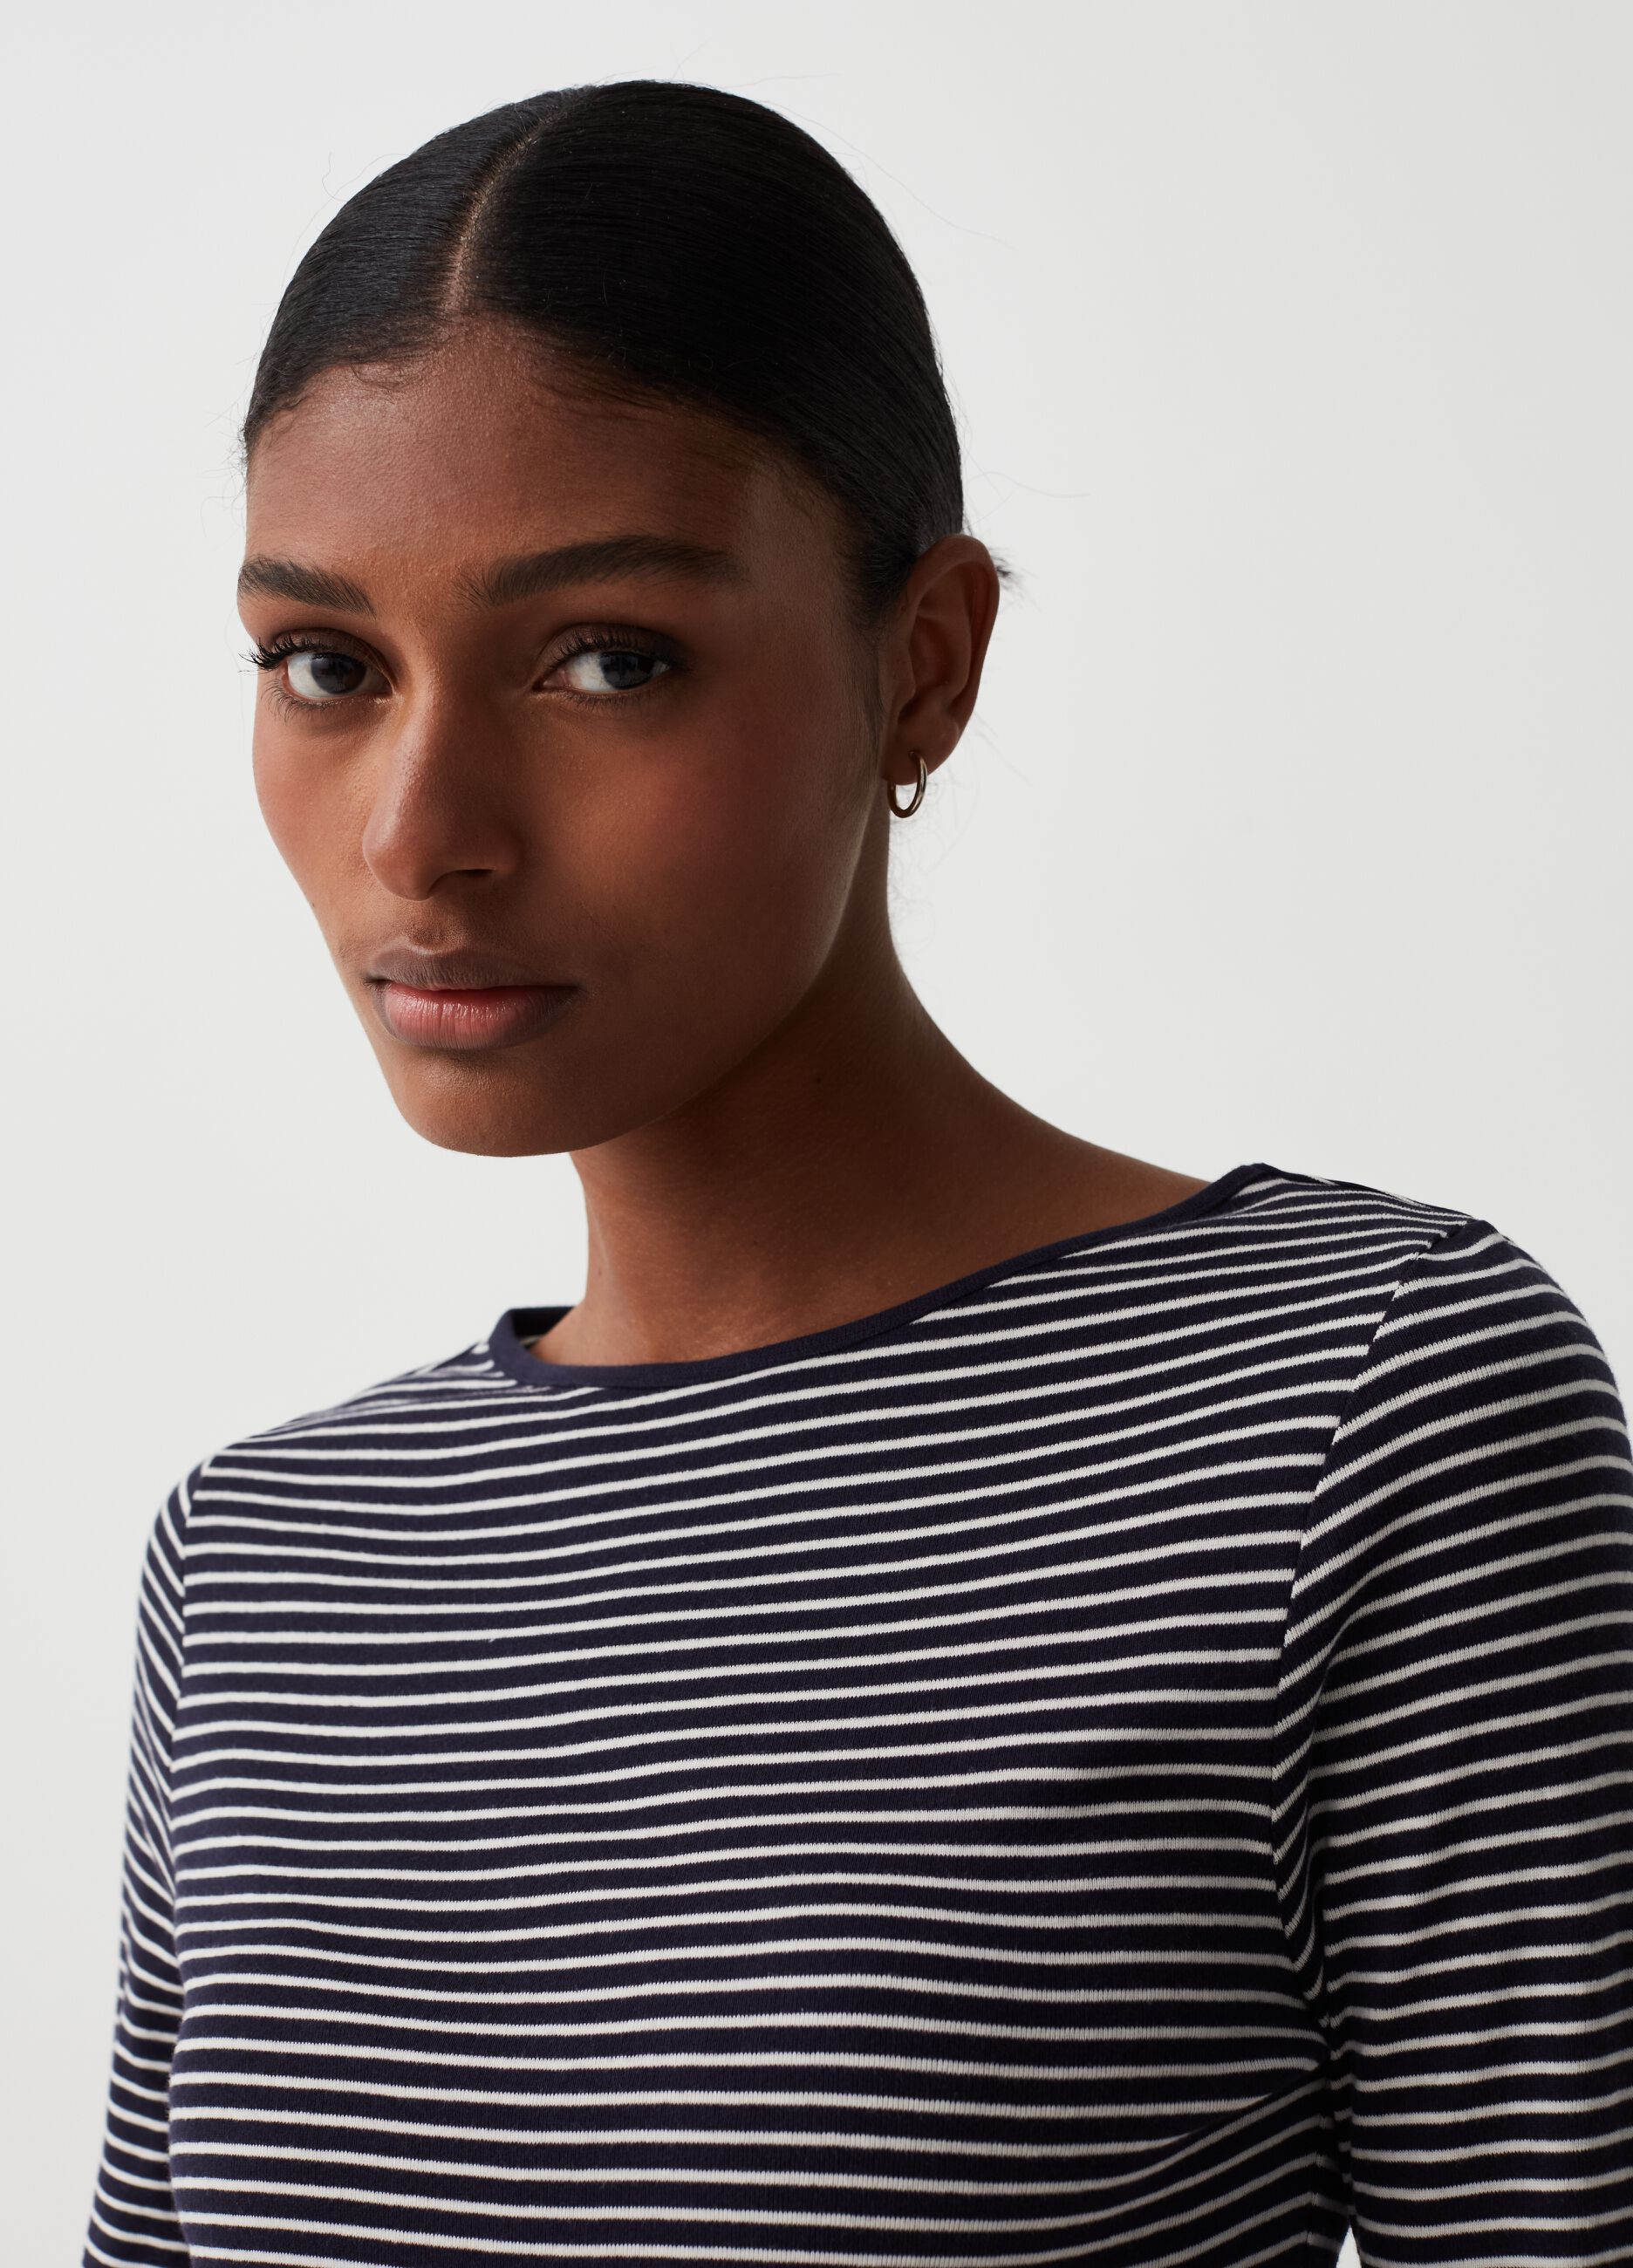 Slim striped T-shirt with boat neck